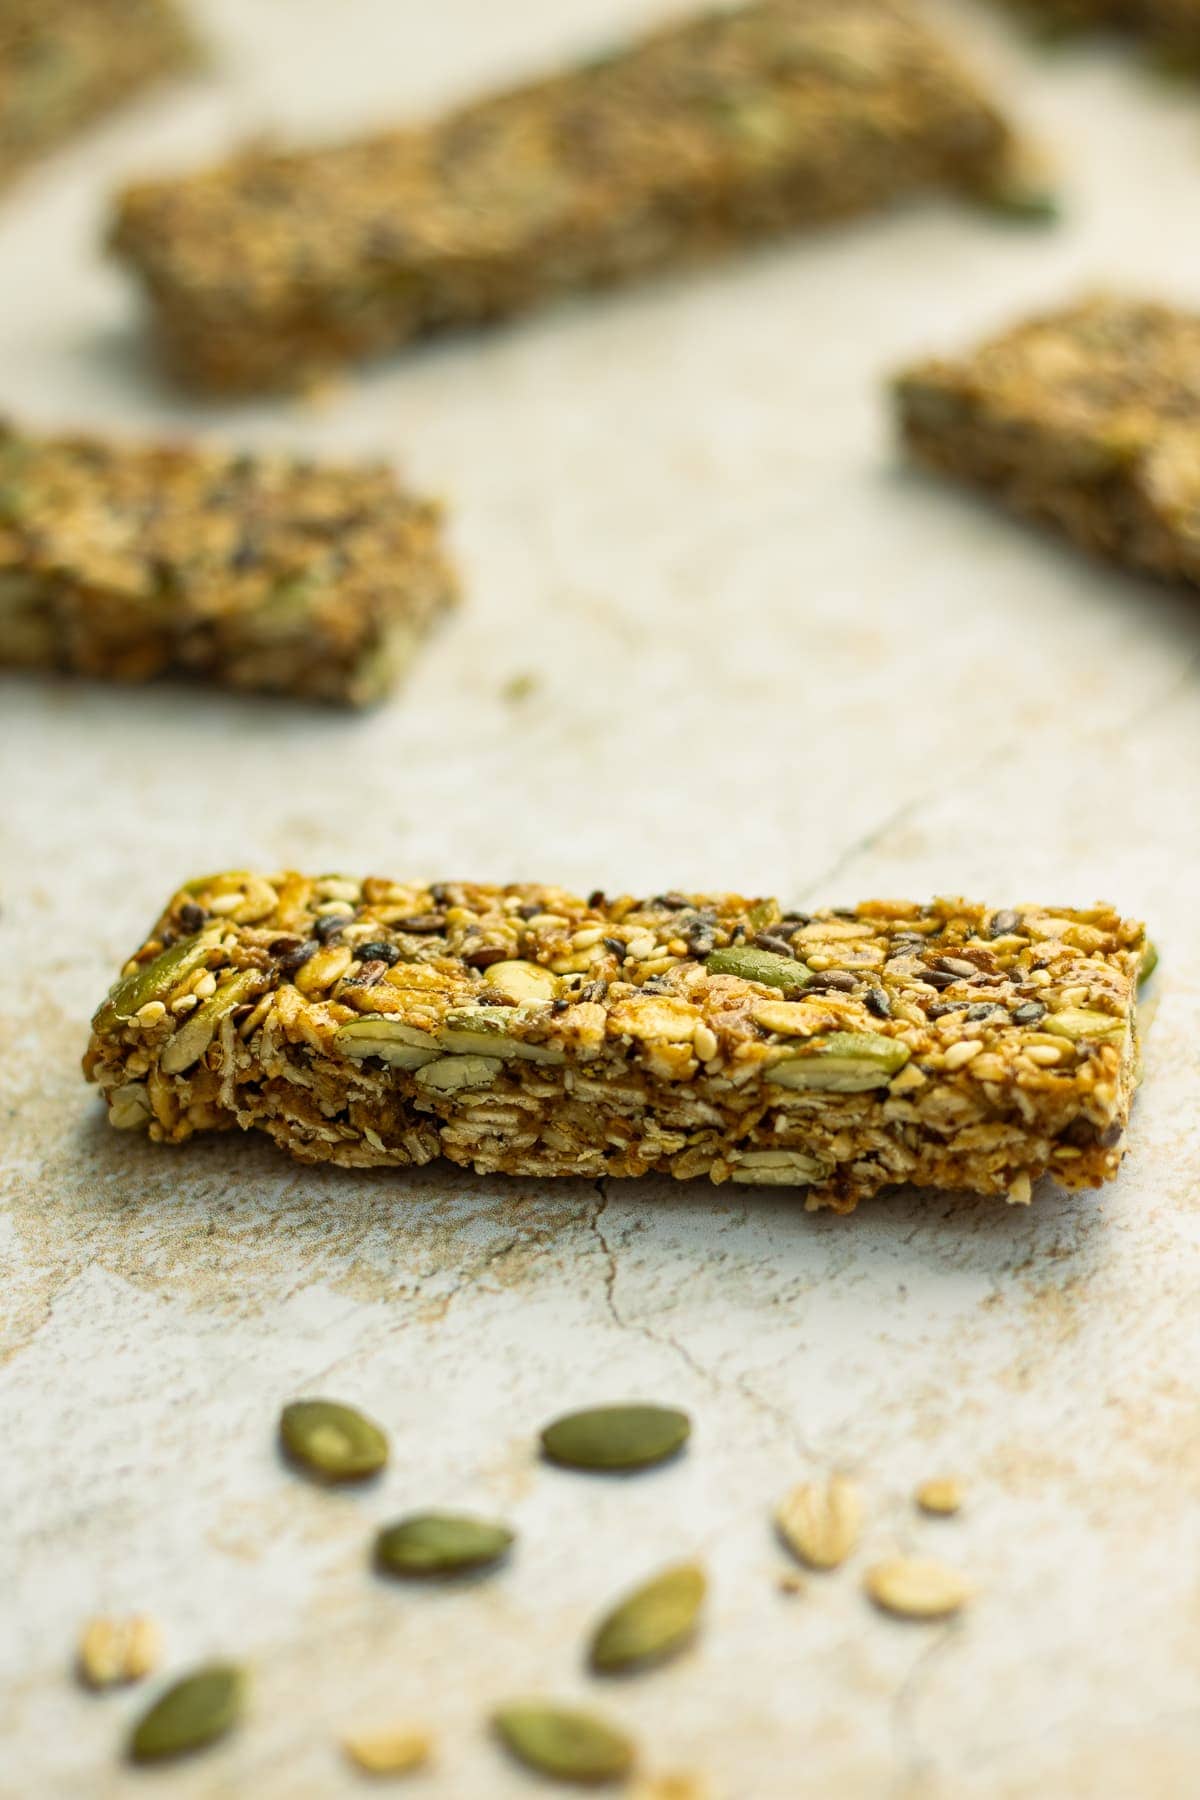 Granola bar in focus with multiple granola bars blurred out in the back